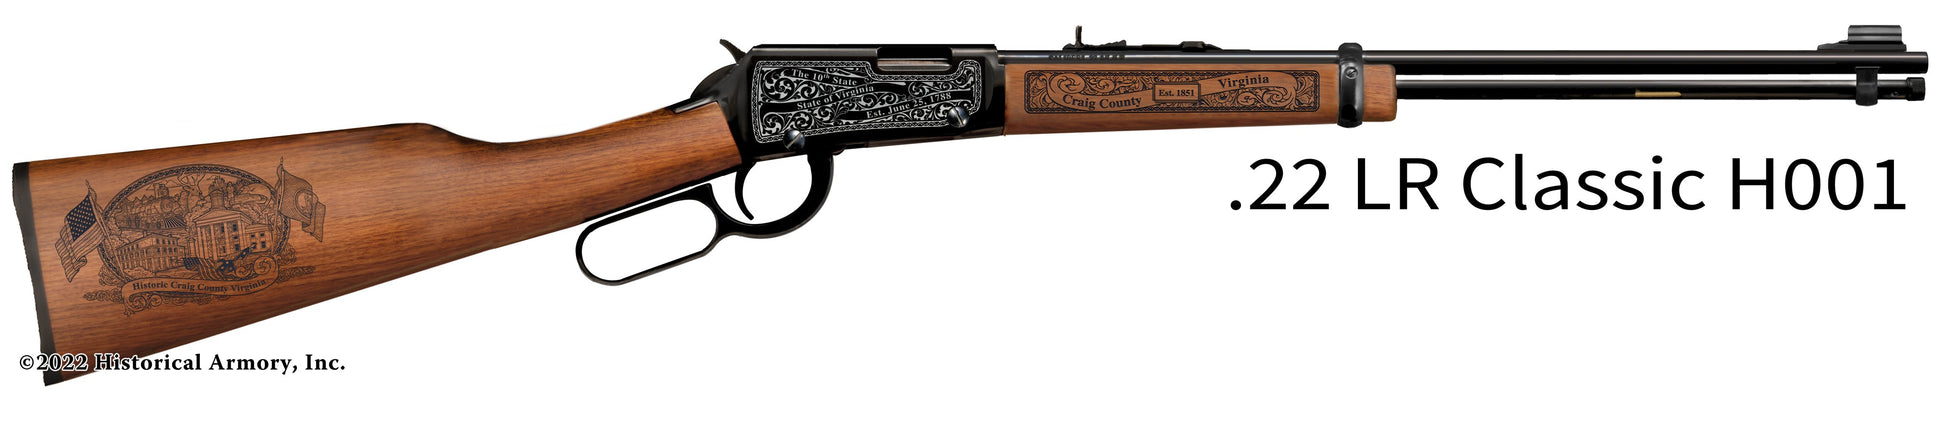 Craig County Virginia Engraved Henry H001 Rifle